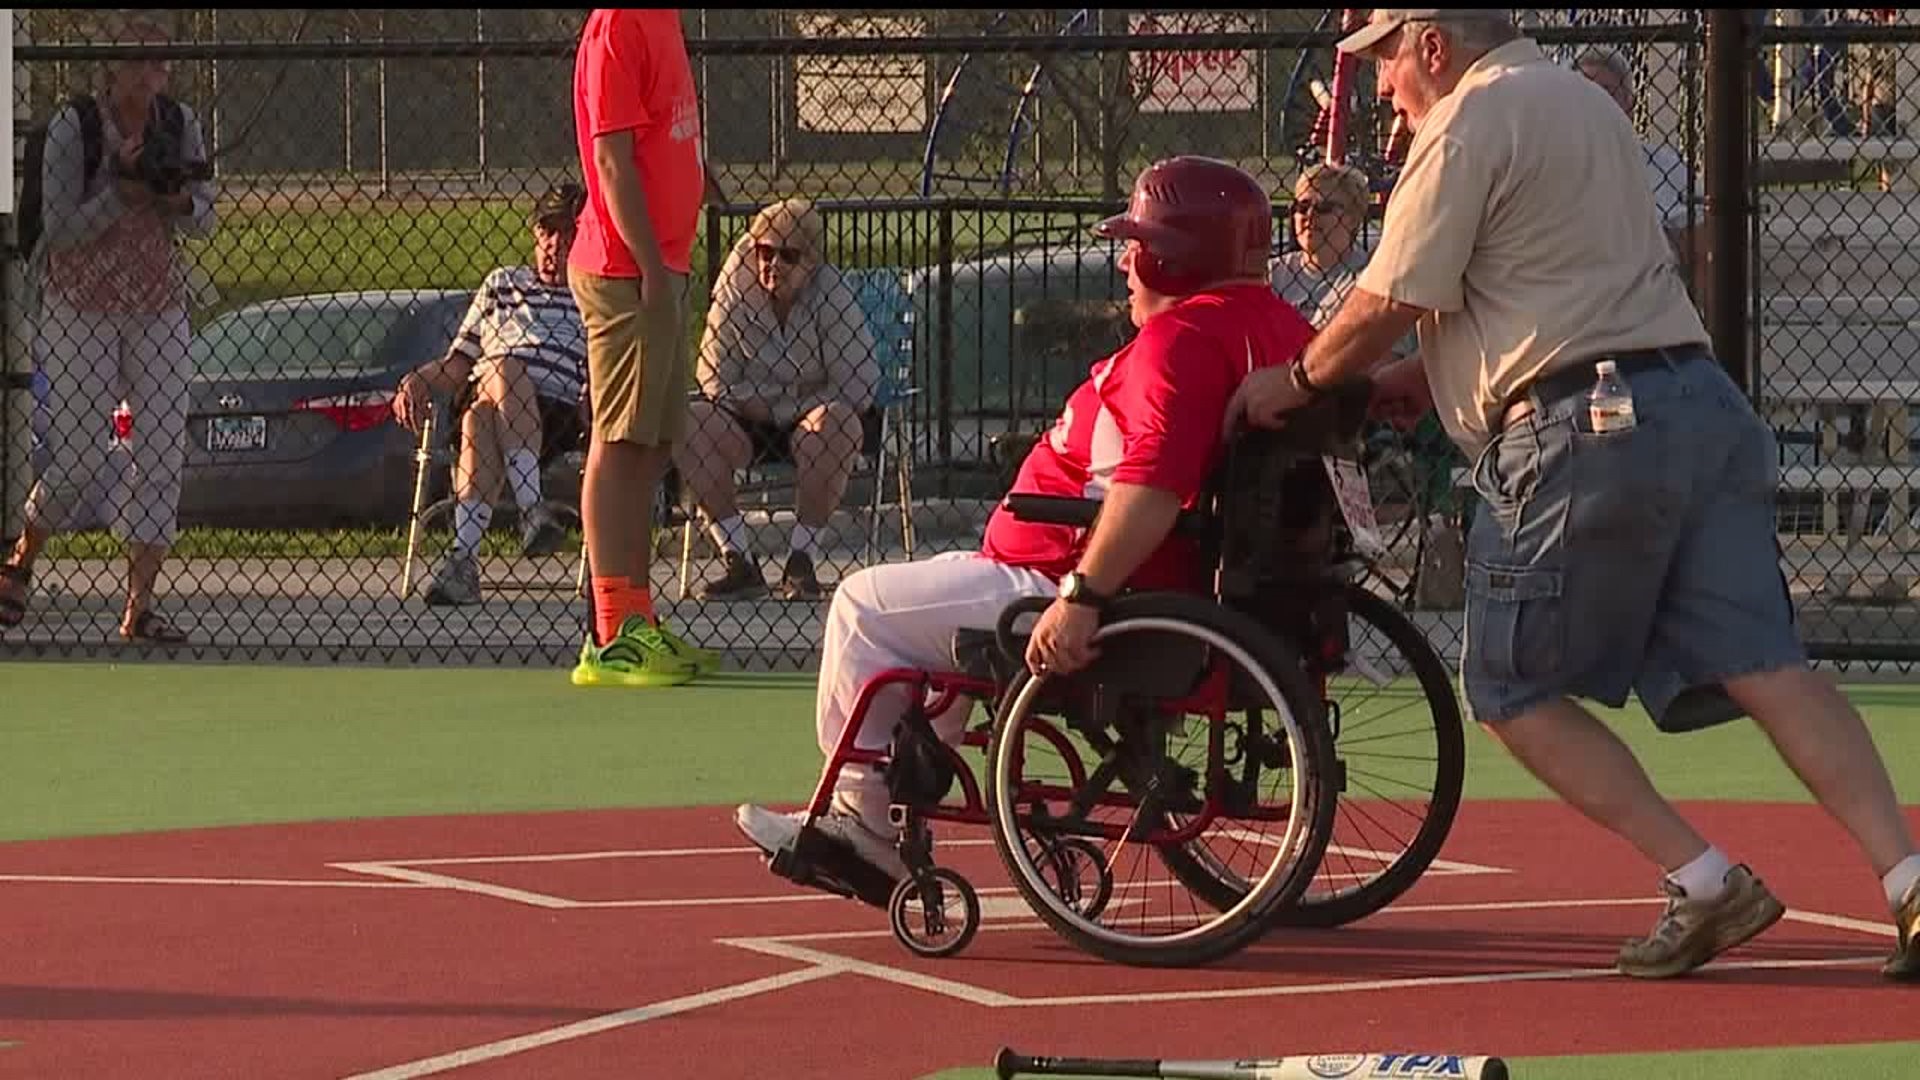 New Miracle Field makes baseball more accessible in the Quad Cities